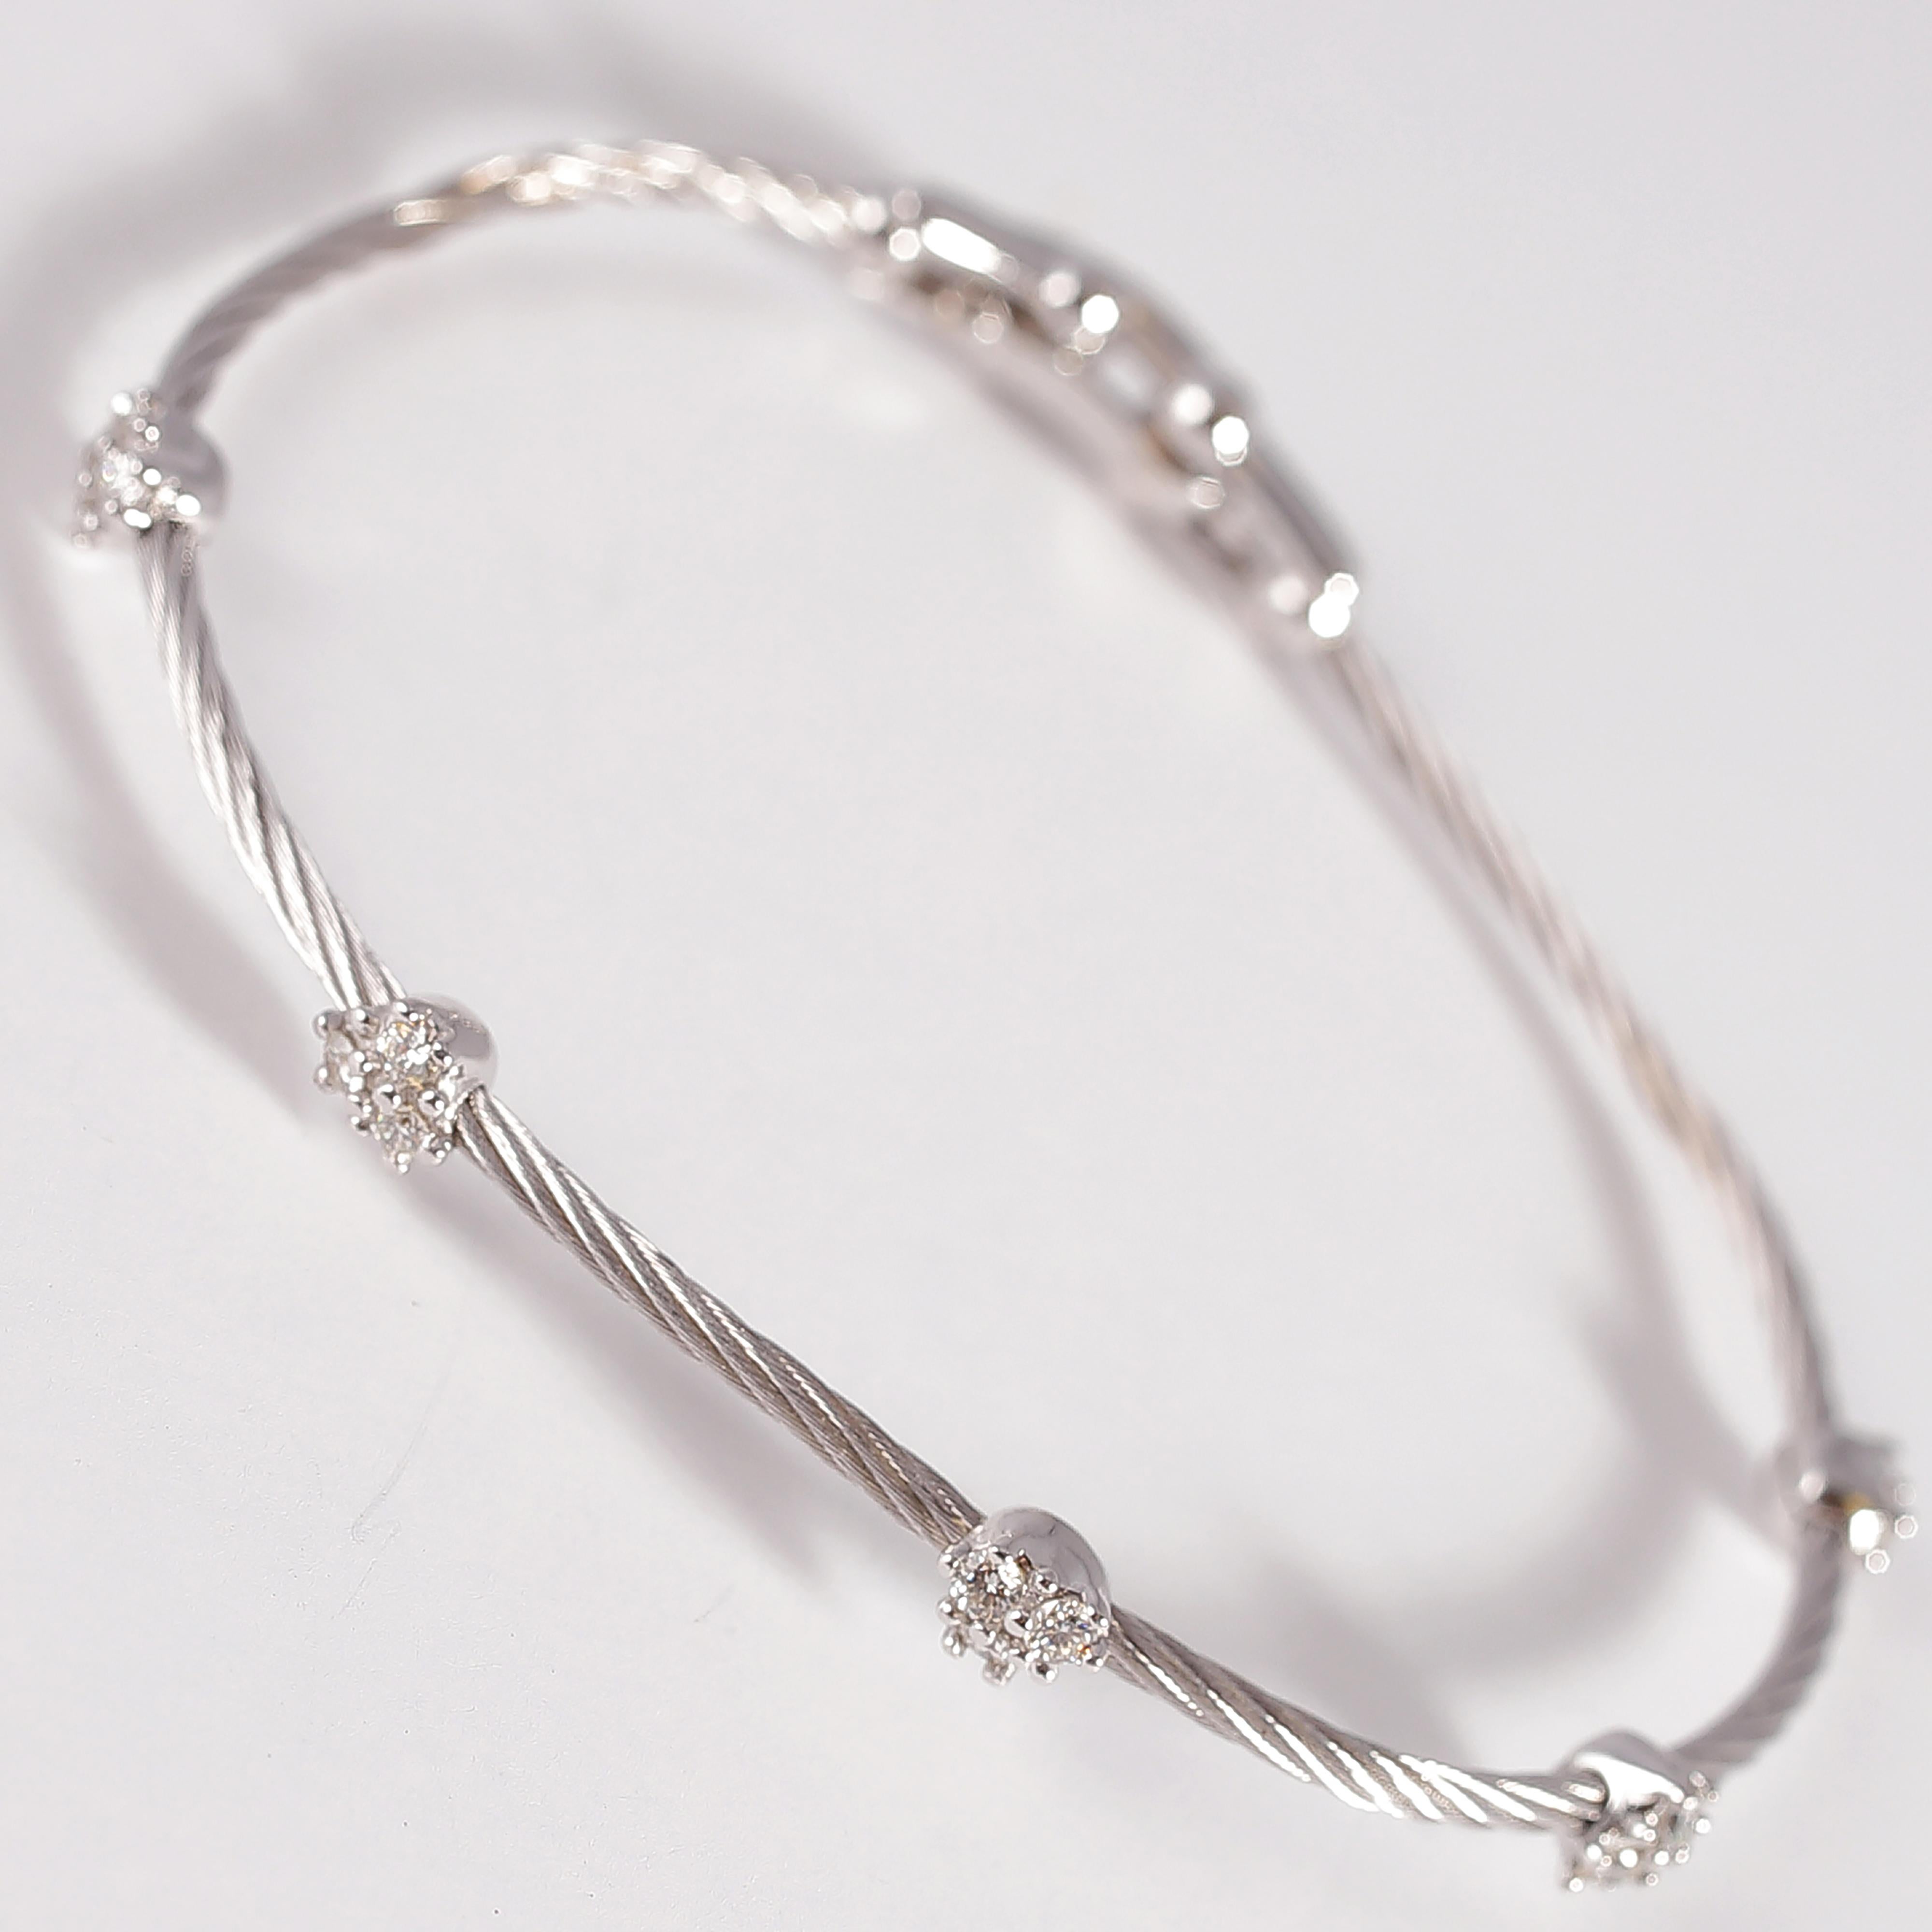 Round Cut Paul Morelli Diamond Bracelet from the Cluster Collection